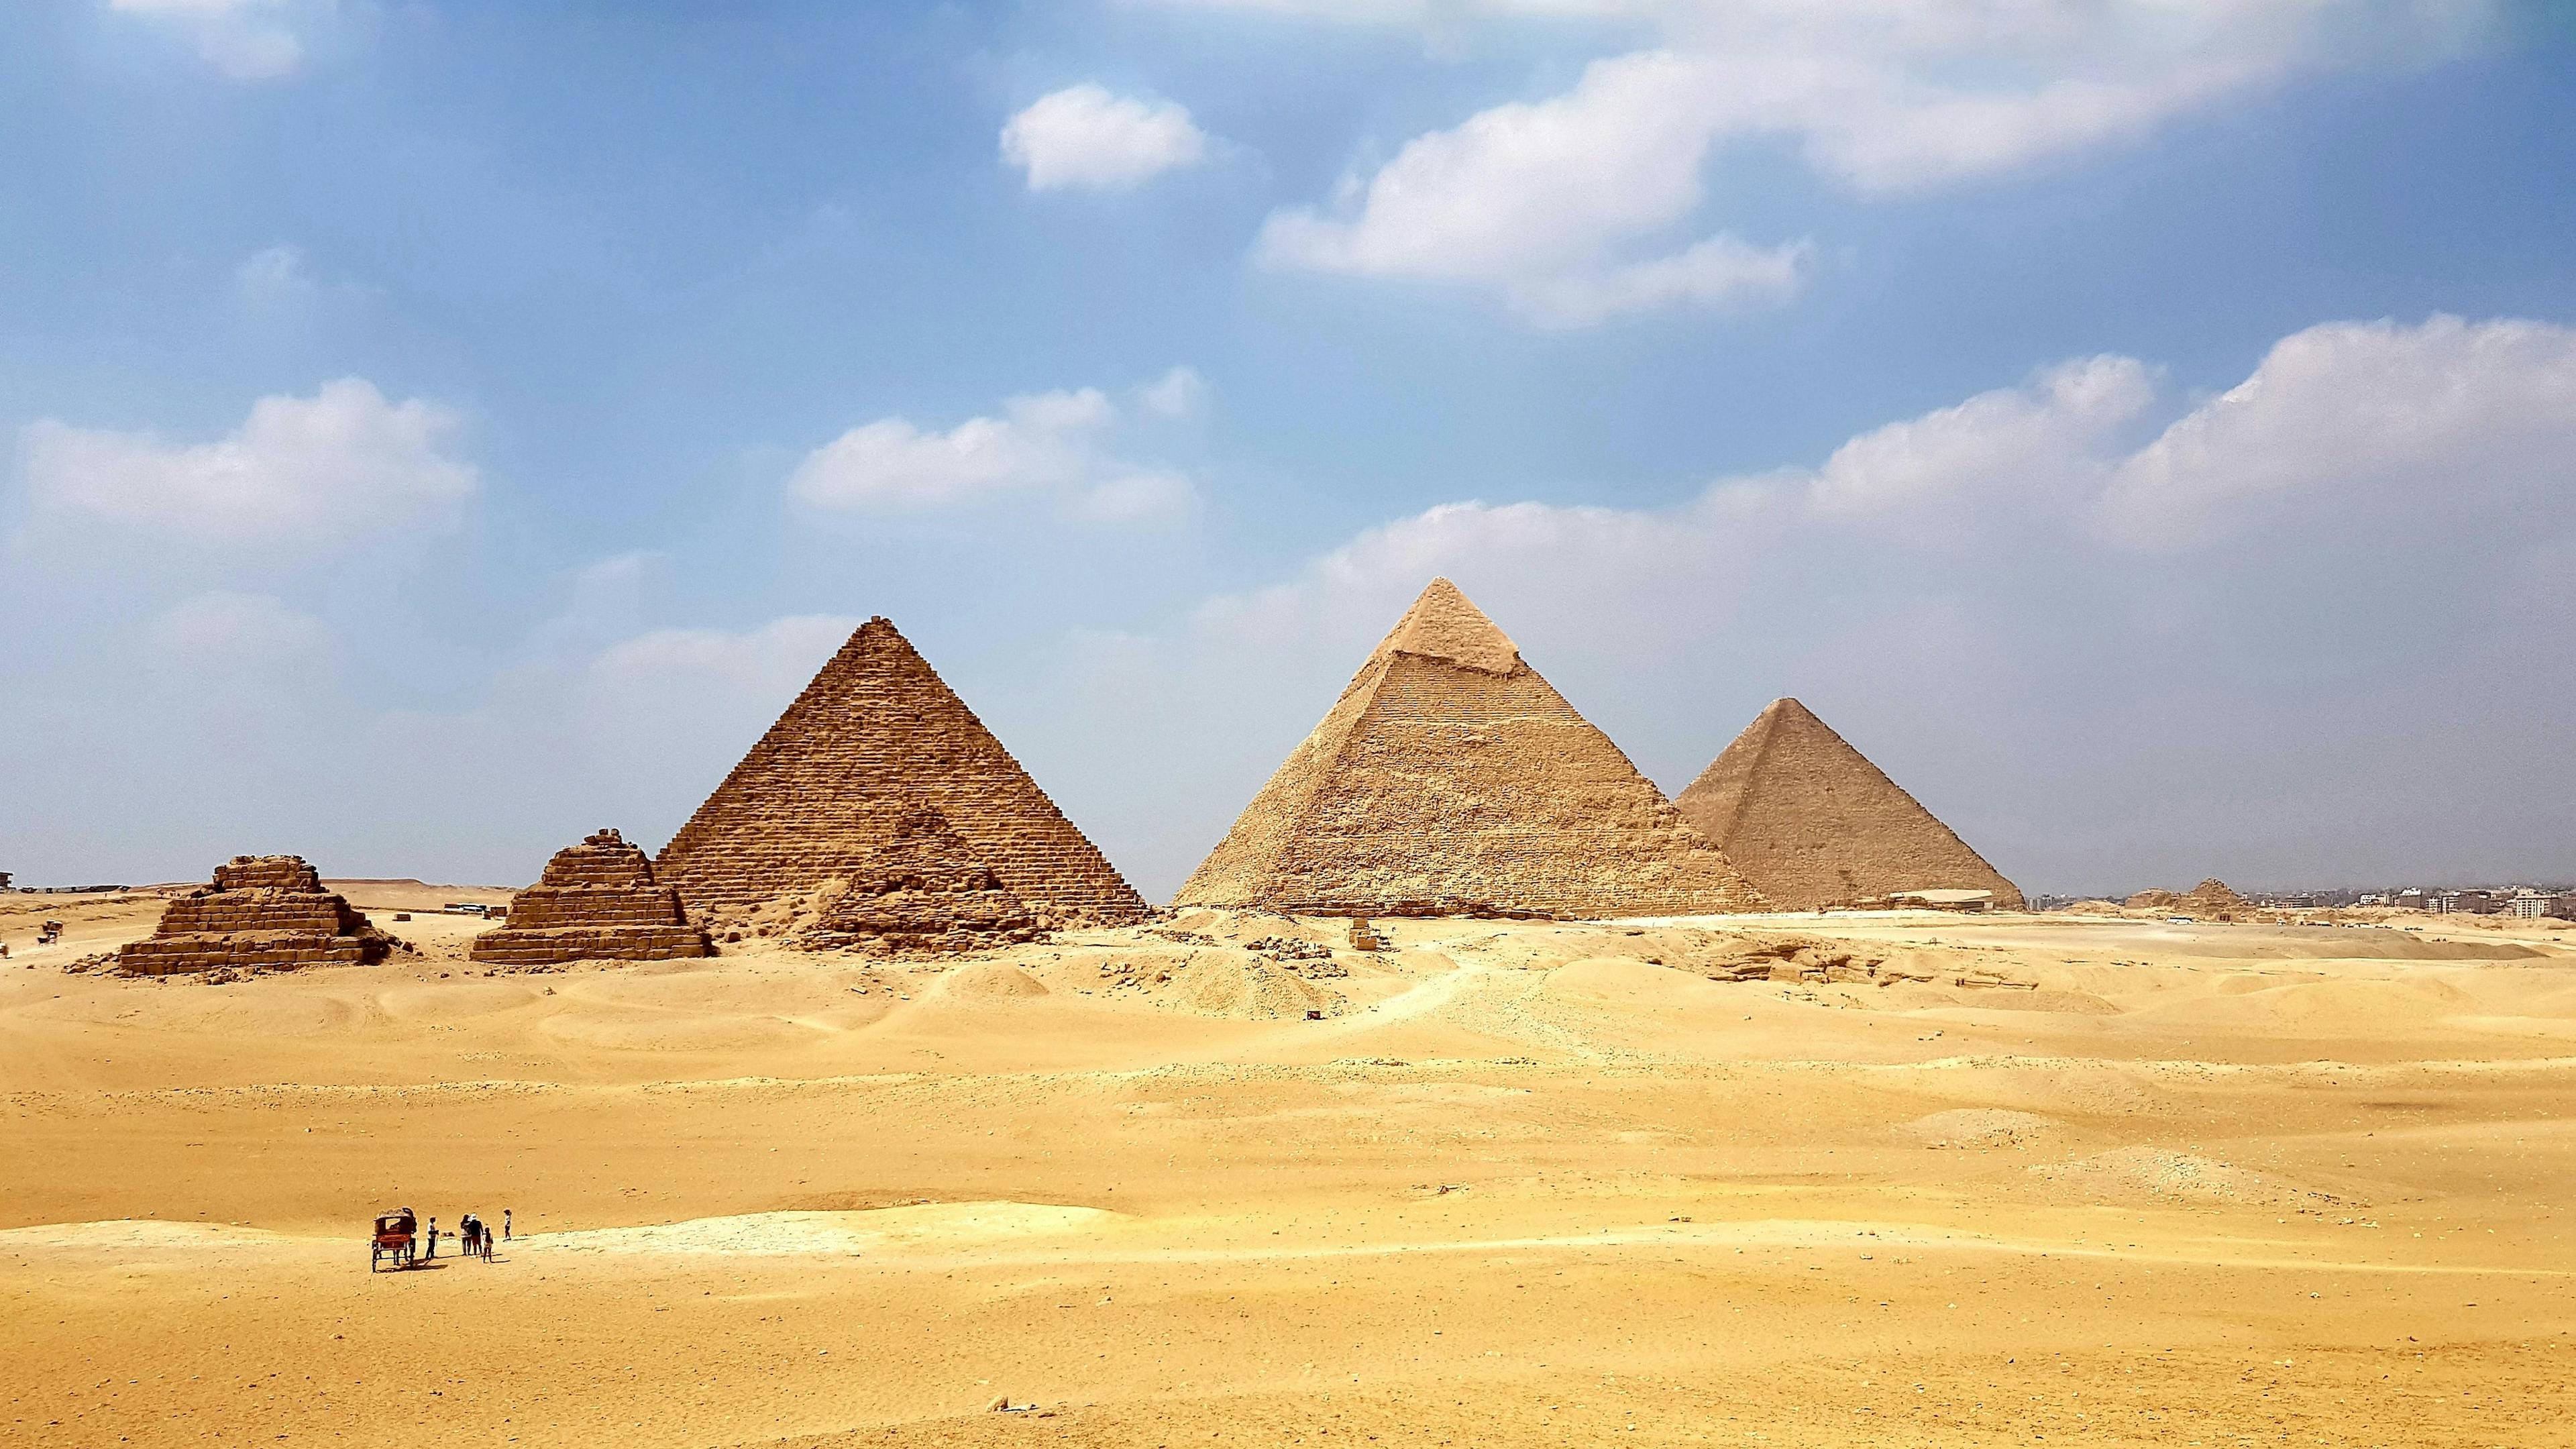 The Pyramids of Giza in Egypt.